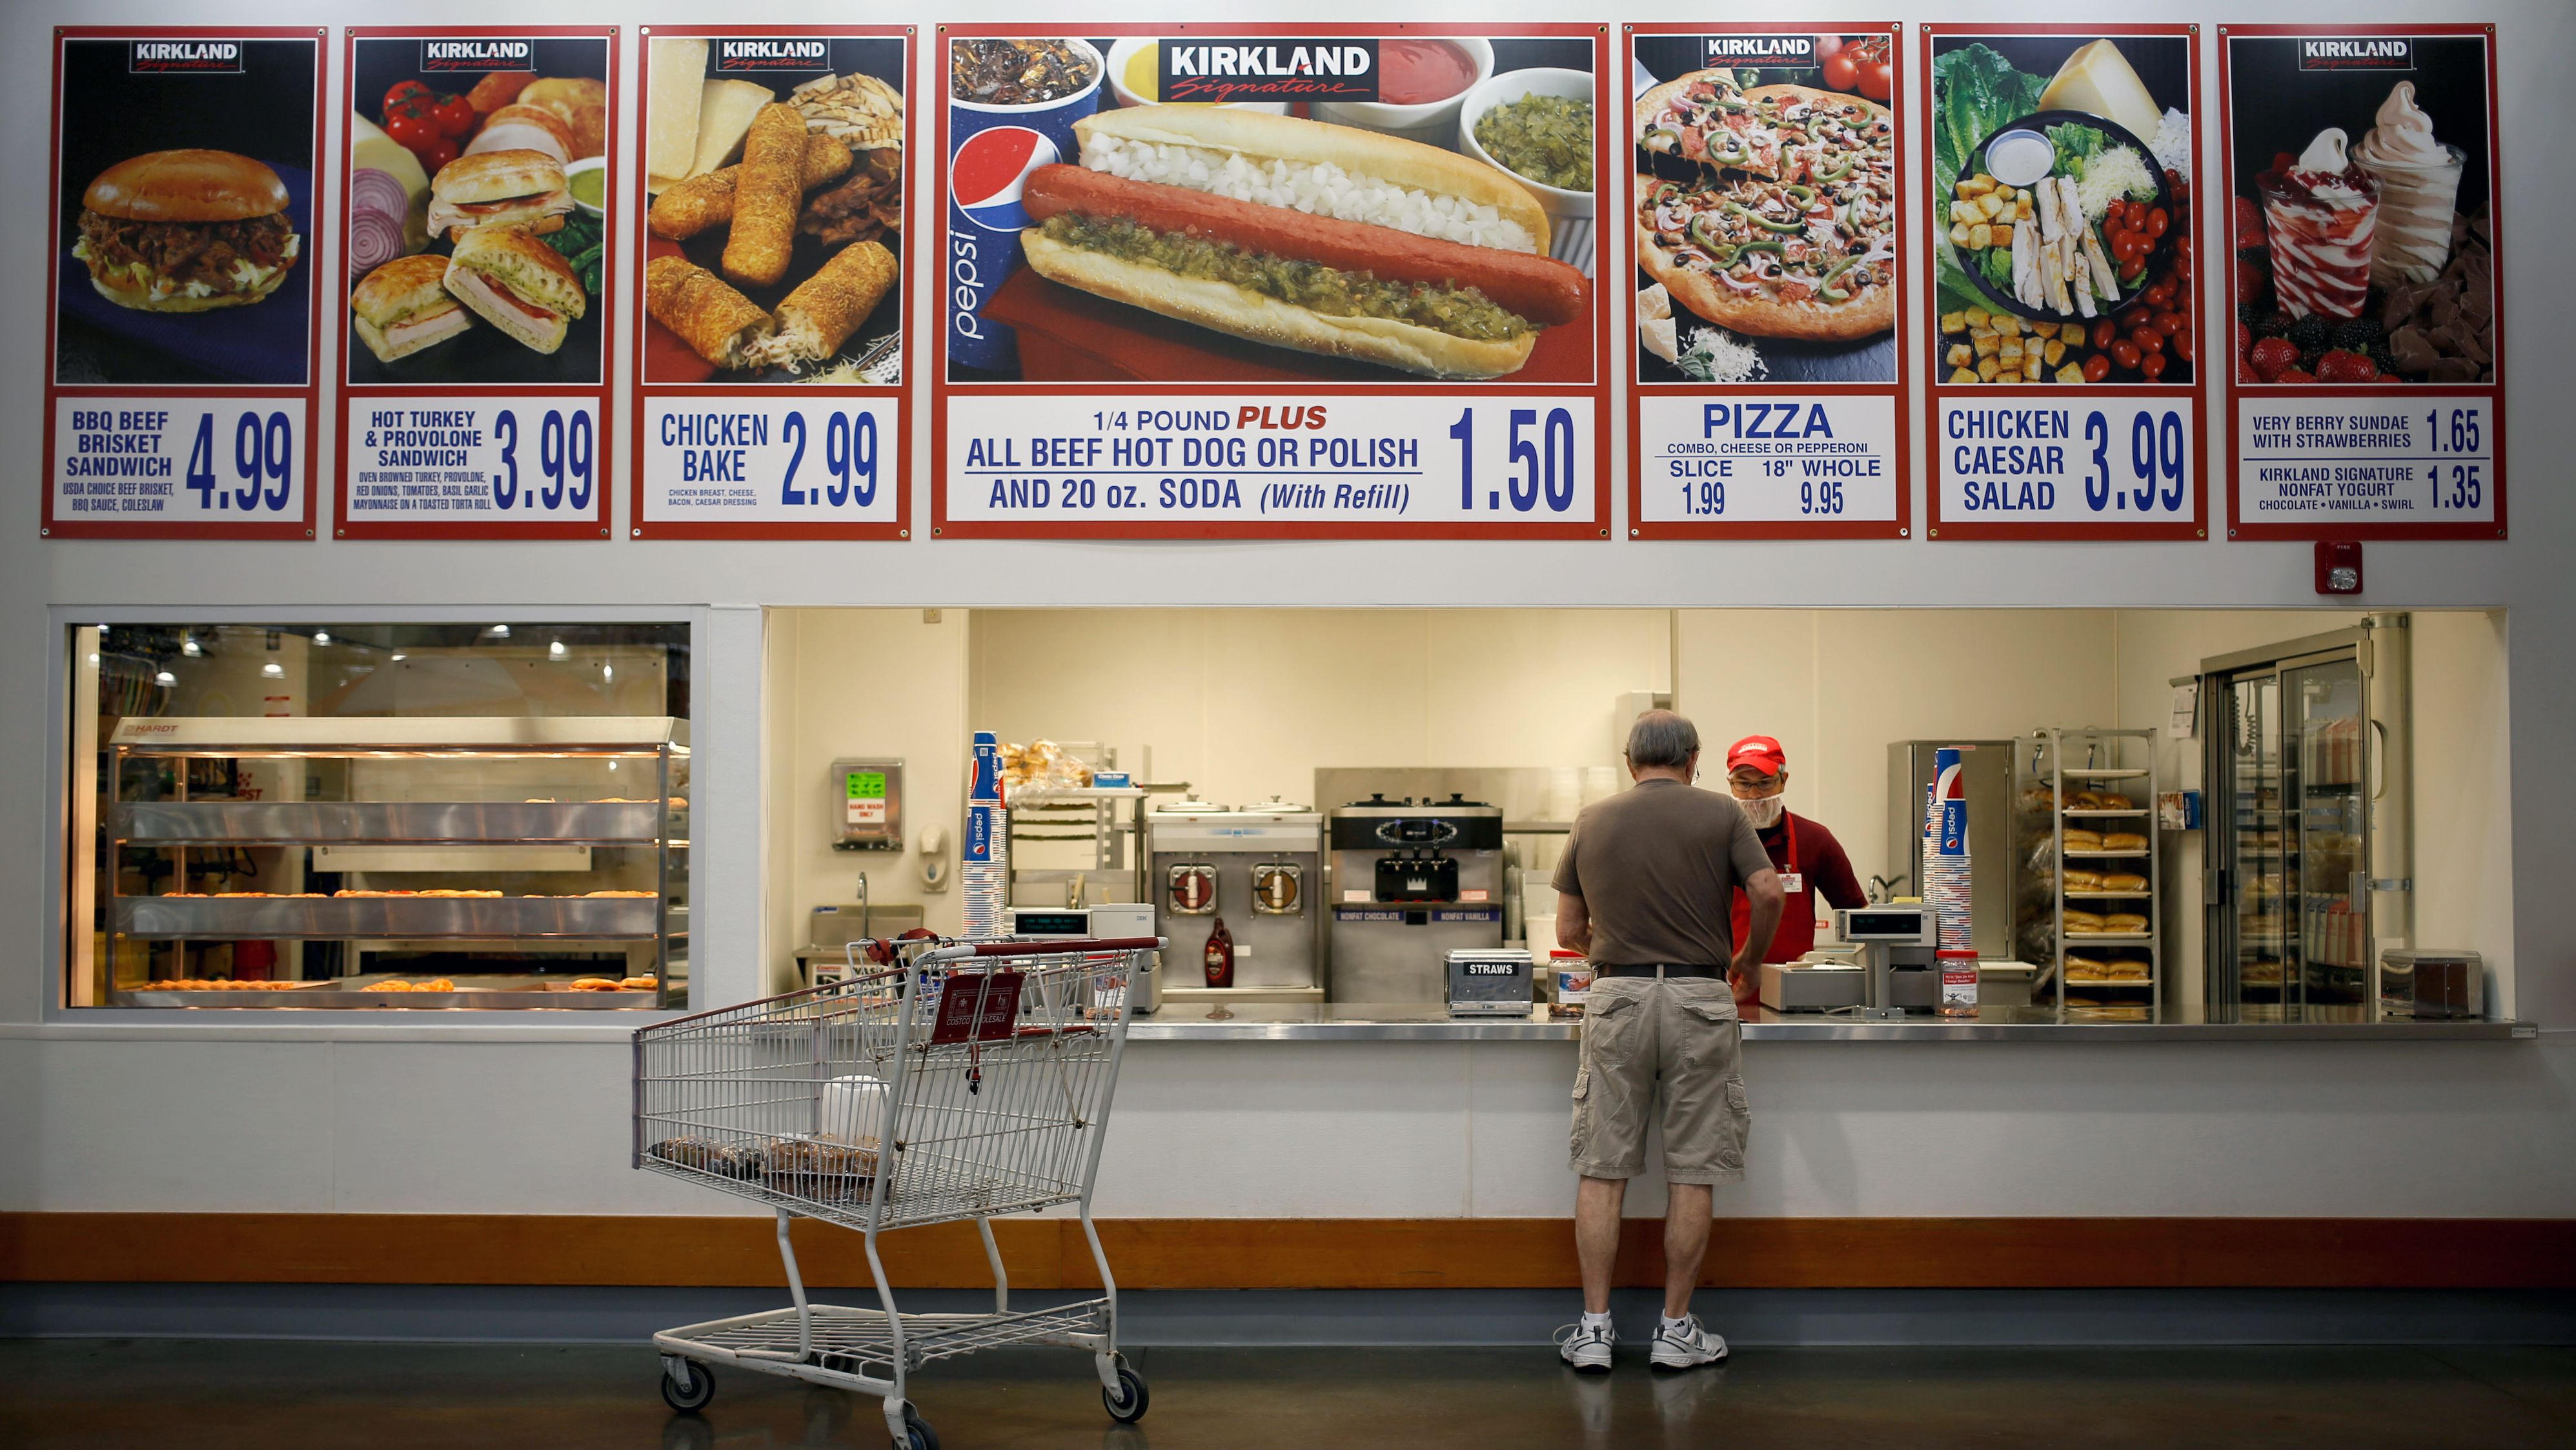 Costco's secret weapon: Food courts and $ hot dogs | CNN Business